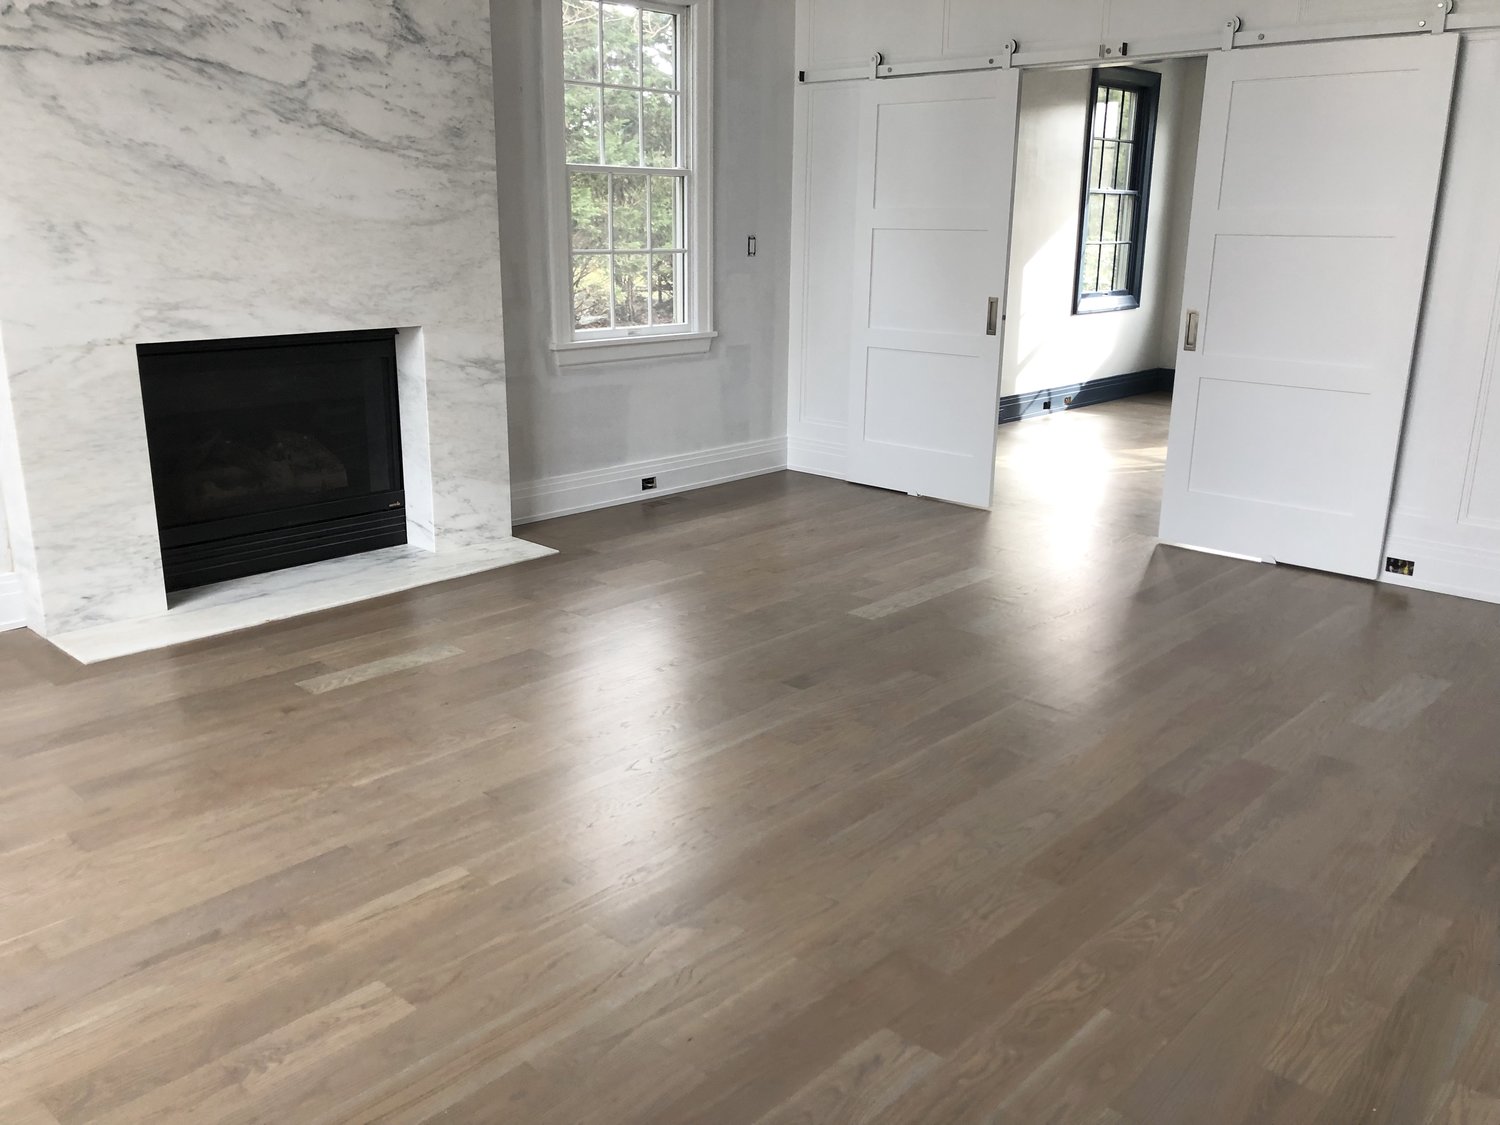 TO GRAY OR NOT TO GRAY? GRAY HARDWOOD FLOORS... A TREND OR